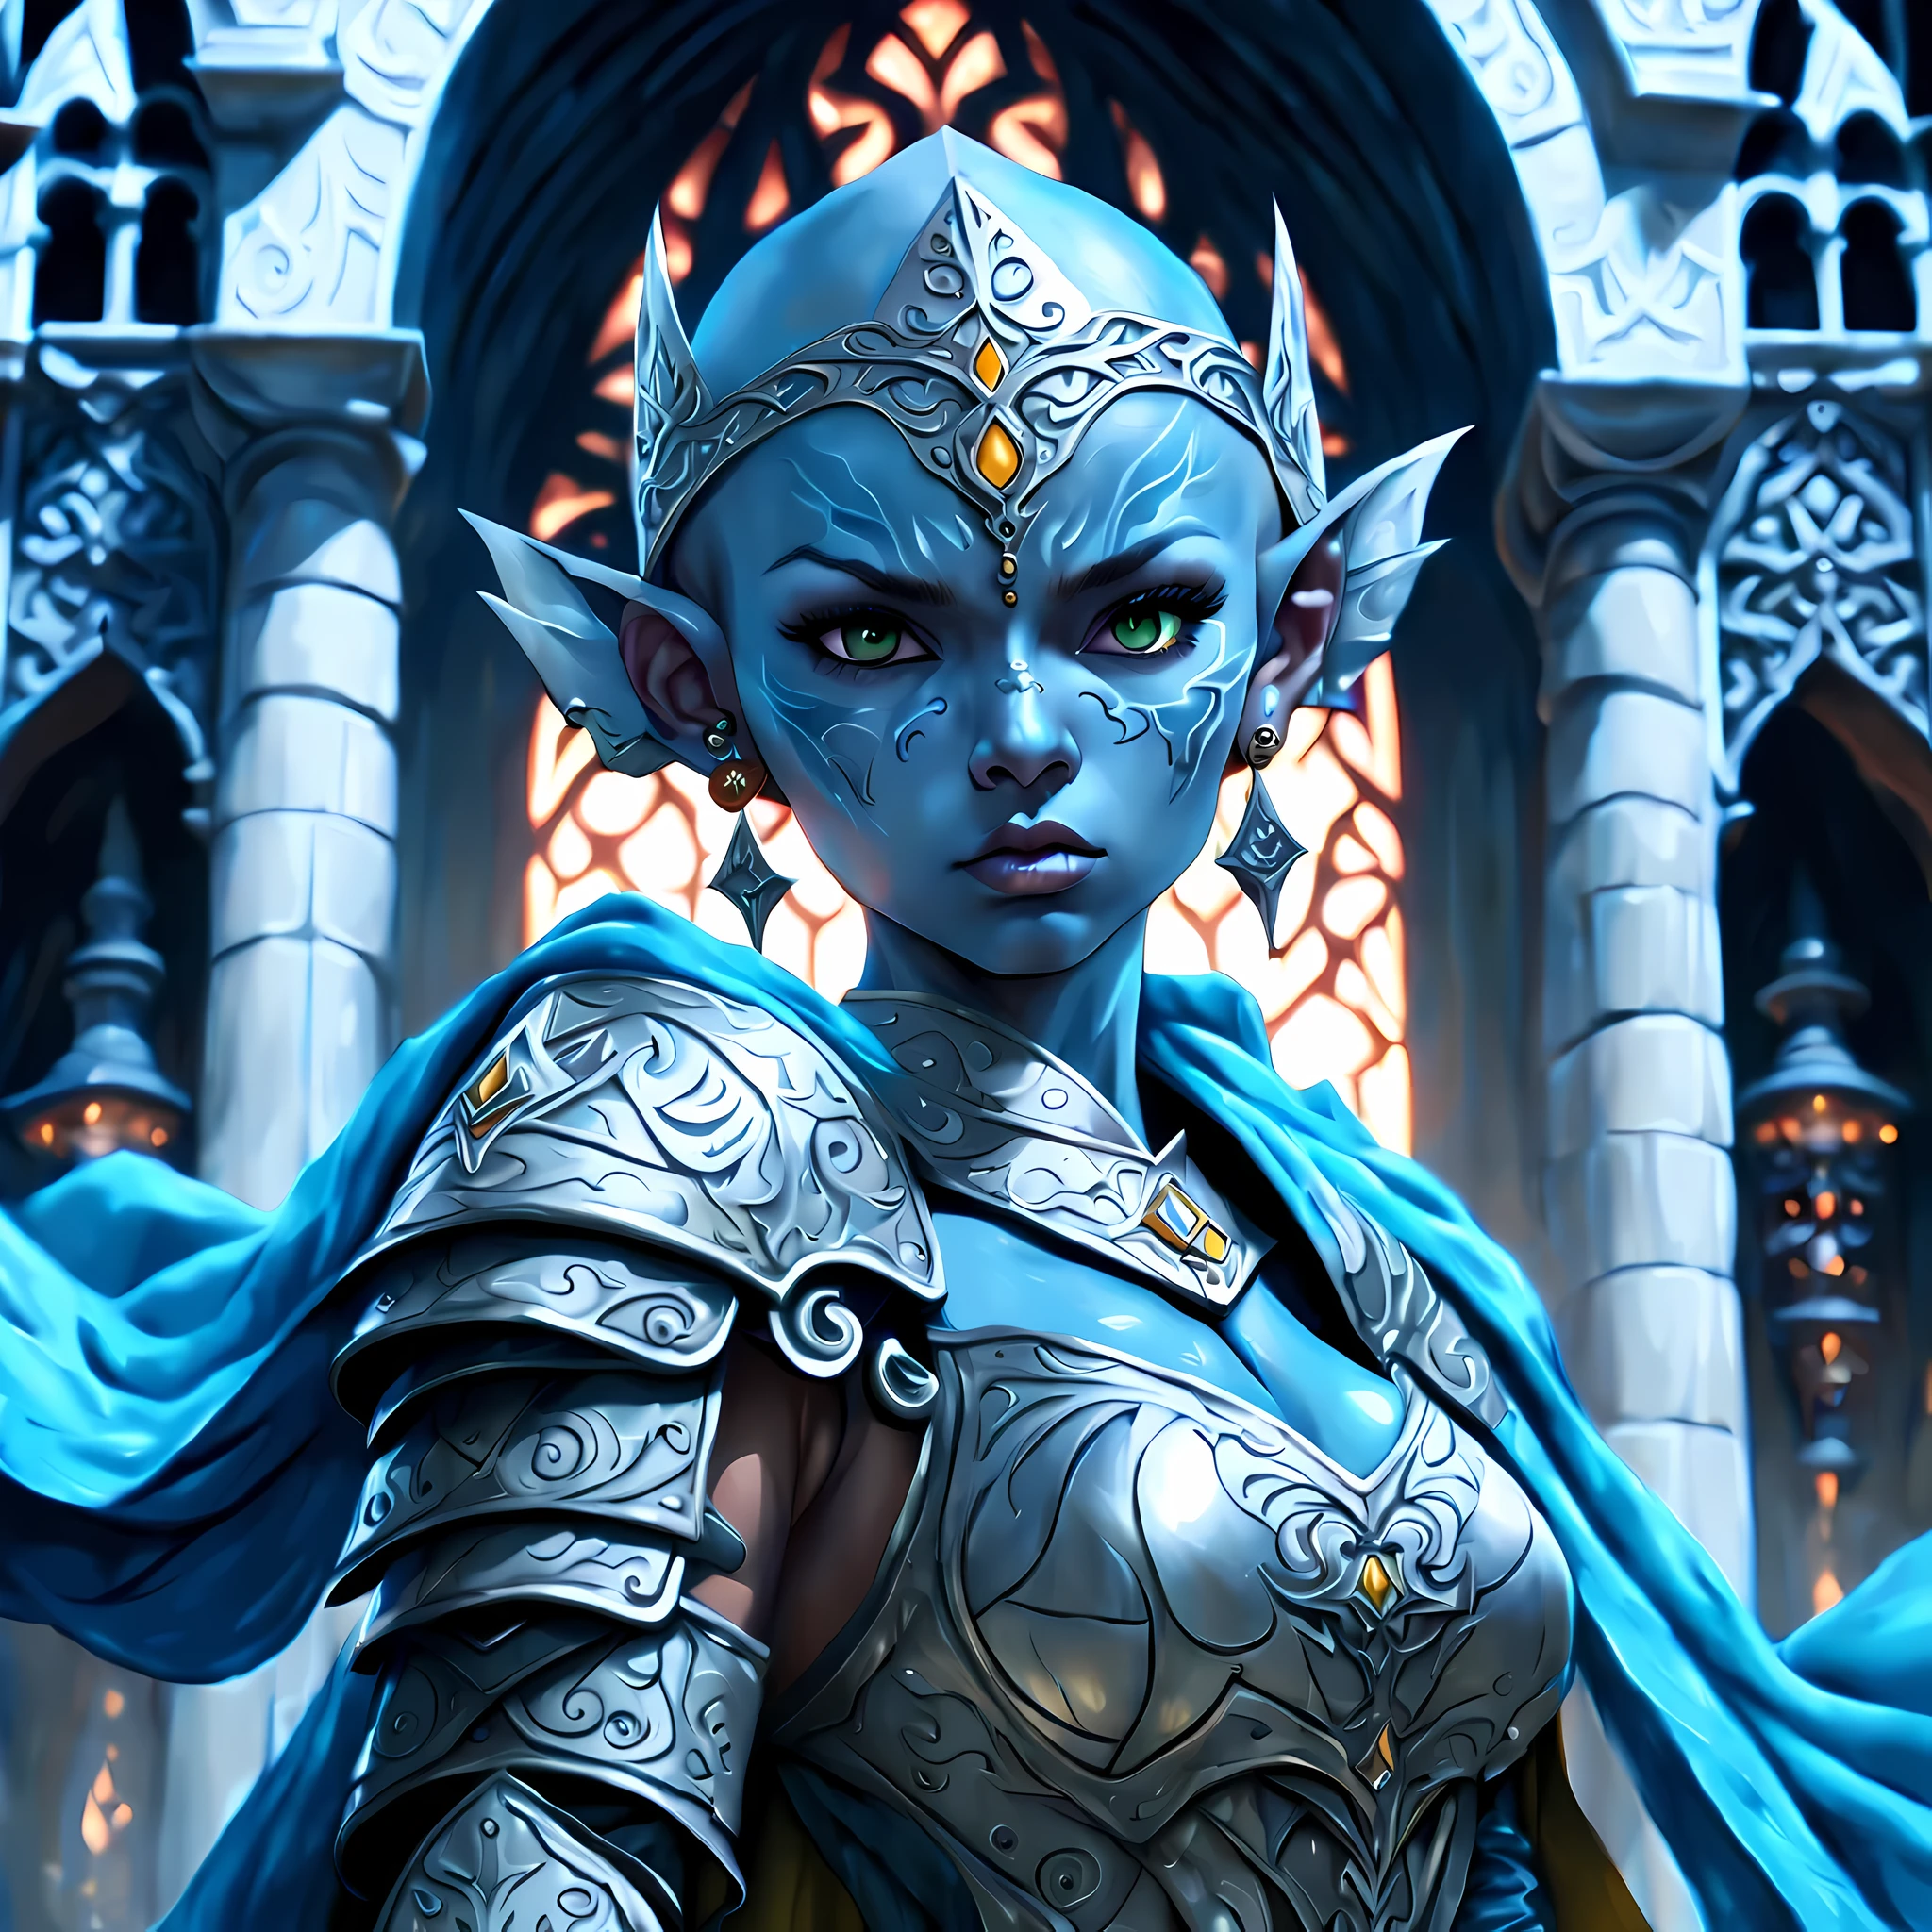 fantasy art, dnd art, RPG art, wide shot, (masterpiece: 1.4) a (portrait: 1.3) intense details, highly detailed, photorealistic, best quality, highres, portrait a female (fantasy art, Masterpiece, best quality: 1.3) ((blue skin: 1.5)), intense details facial details, exquisite beauty, (fantasy art, Masterpiece, best quality) cleric, (blue: 1.3) skinned female bald head, no ears, (green: 1.3) eye, fantasy art, Masterpiece, best quality) armed a fiery sword red fire, wearing heavy (white: 1.3) half plate mail armor, wearing high heeled laced boots, wearing an(orange :1.3) cloak, wearing glowing holy symbol GlowingRunes_yellow, within fantasy temple background, reflection light, high details, best quality, 16k, [ultra detailed], masterpiece, best quality, (extremely detailed), close up, ultra wide shot, photorealistic, RAW, fantasy art, dnd art, fantasy art, realistic art,((best quality)), ((masterpiece)), (detailed), perfect face, ((no ears: 1.6))